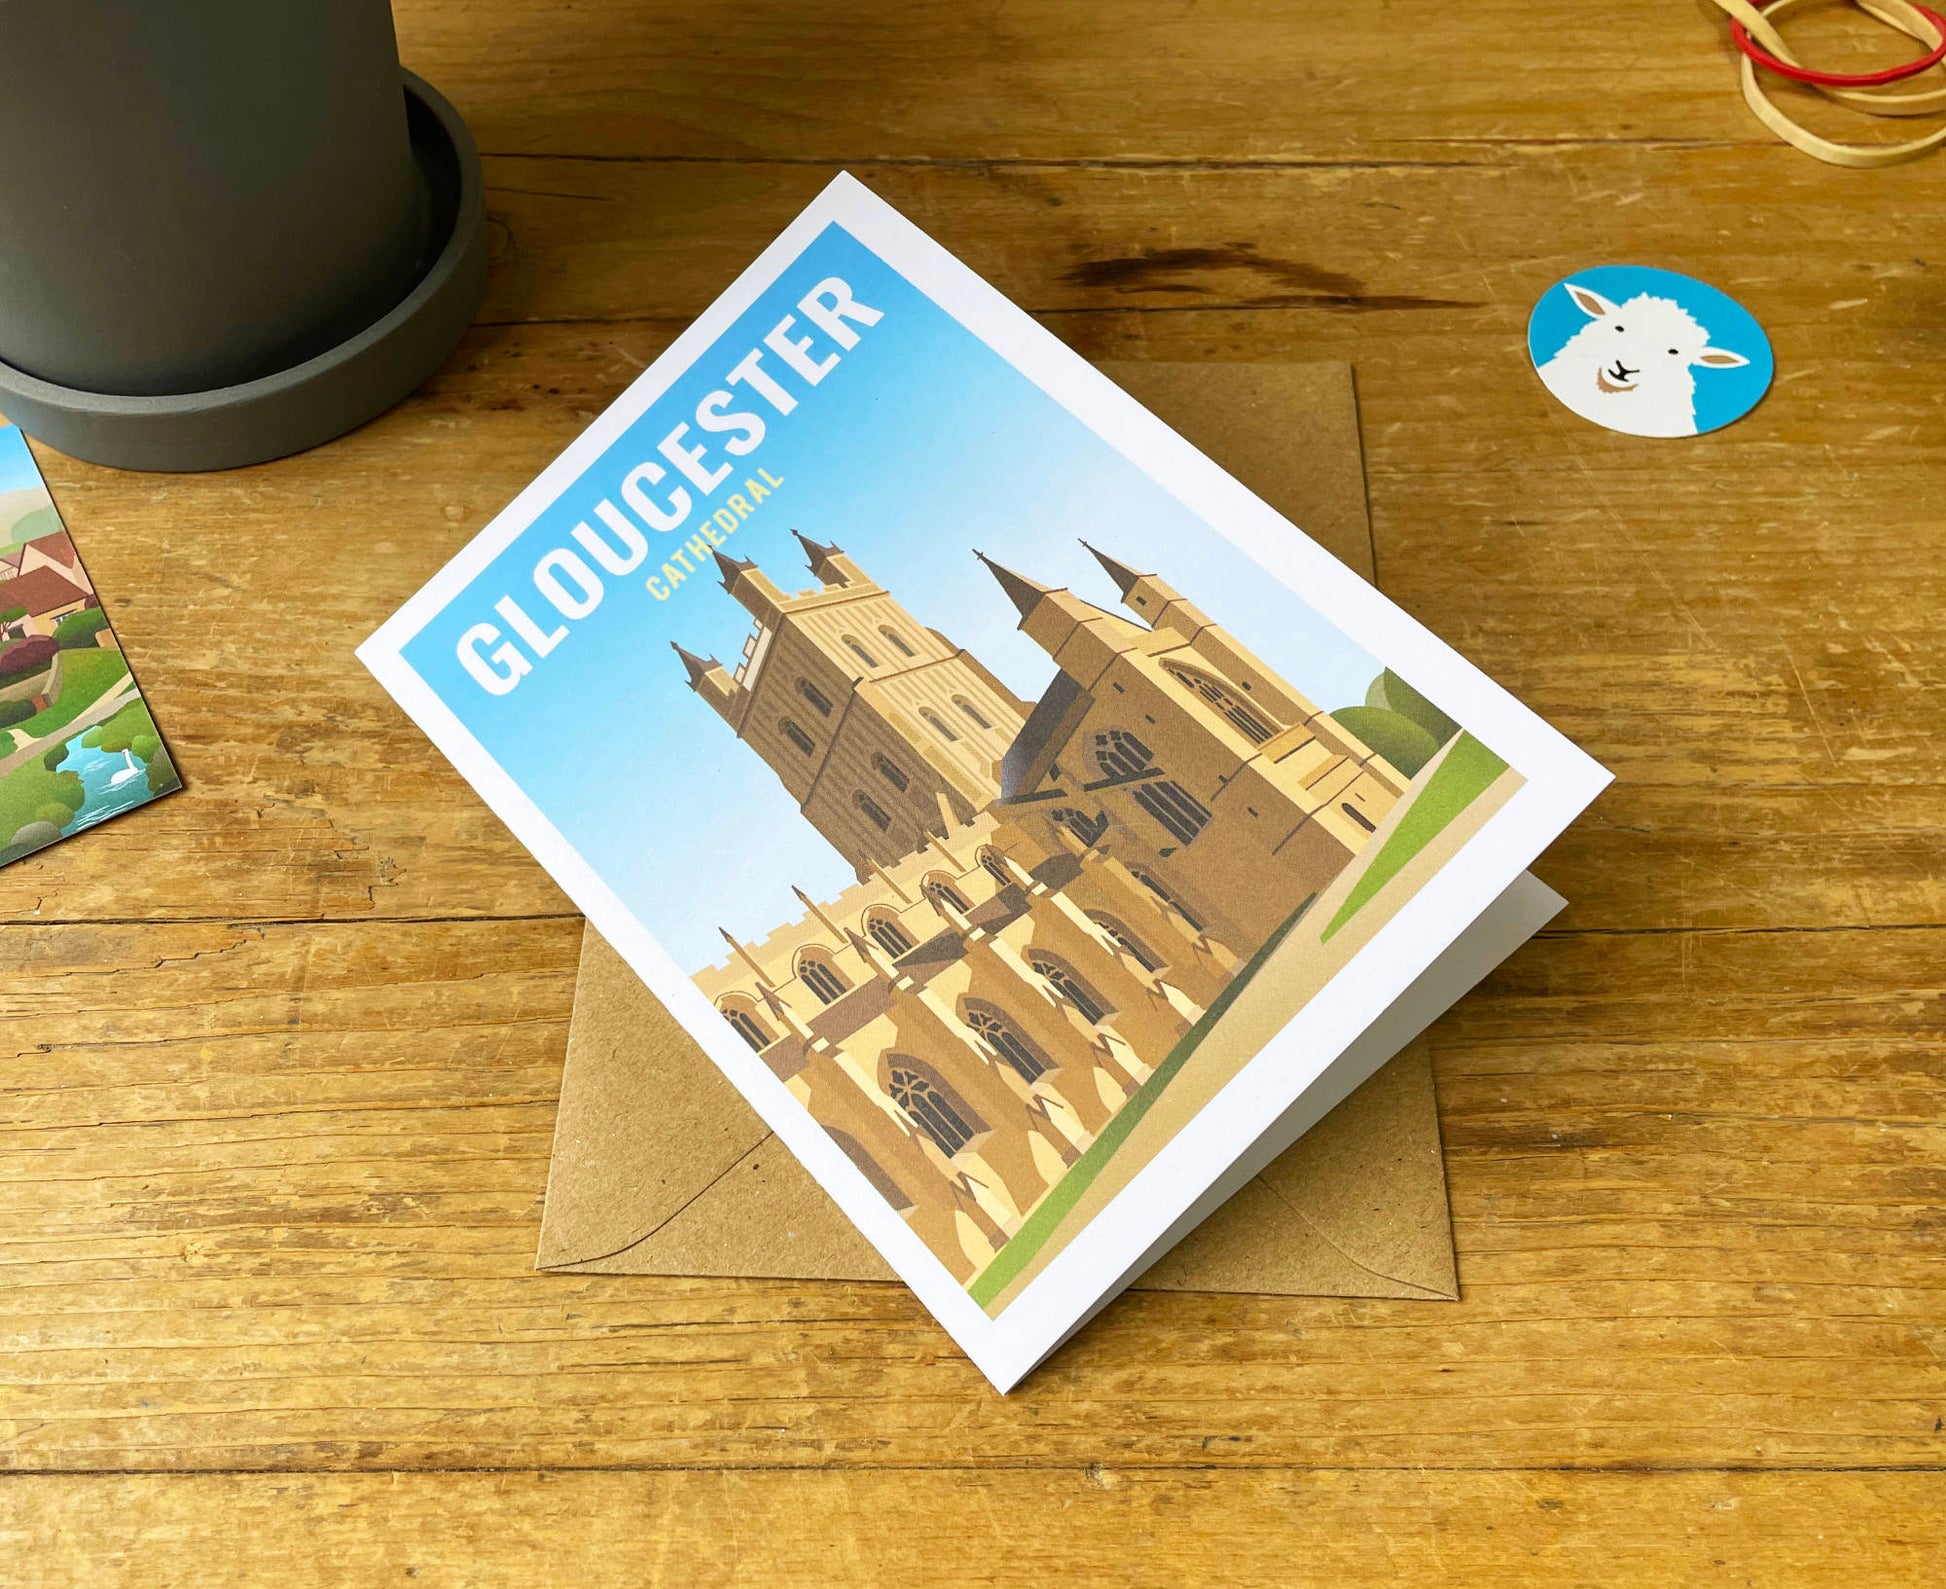 Gloucester Cathedral Greeting Card on table